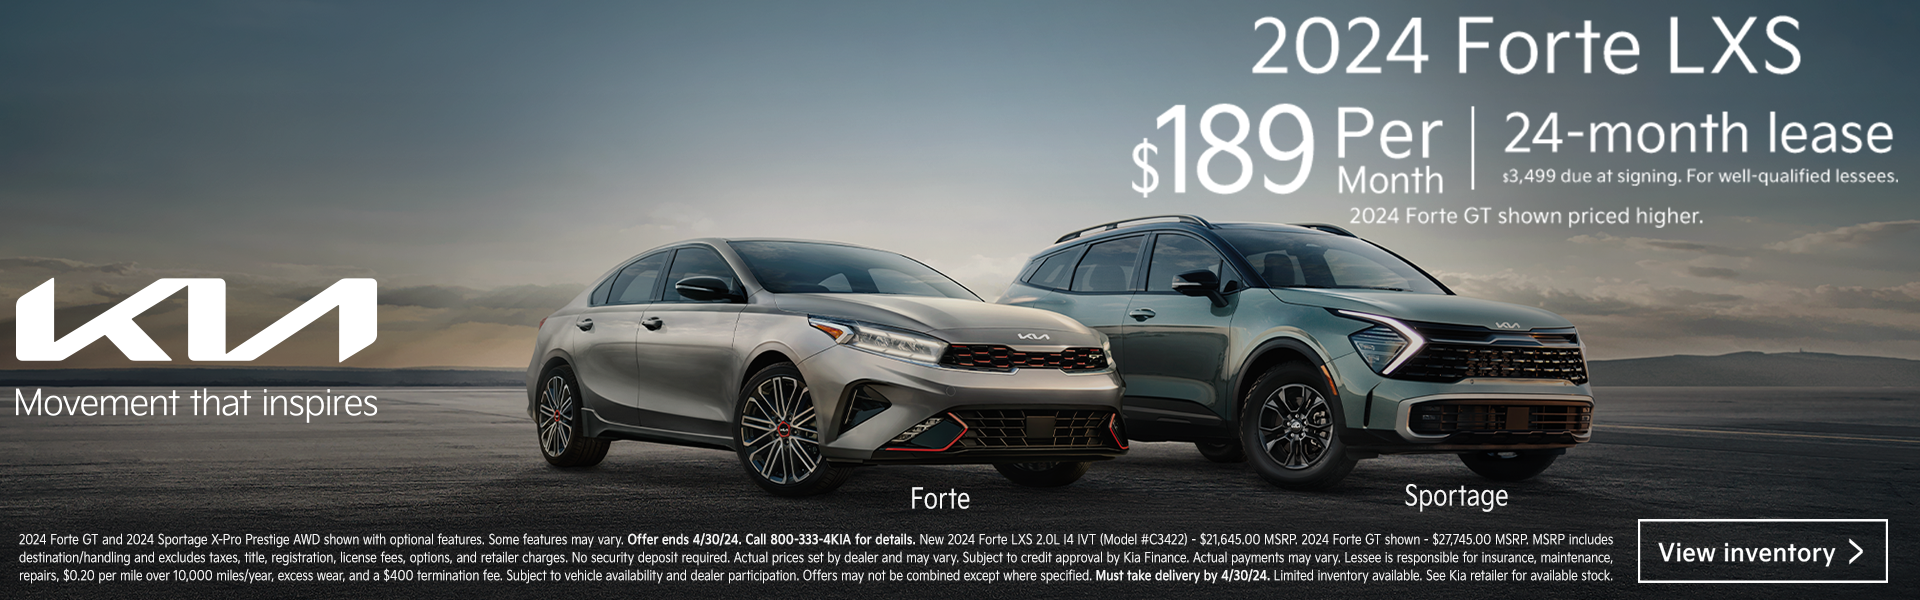 2024 Forte LXS $189 Per Month 24-month lease